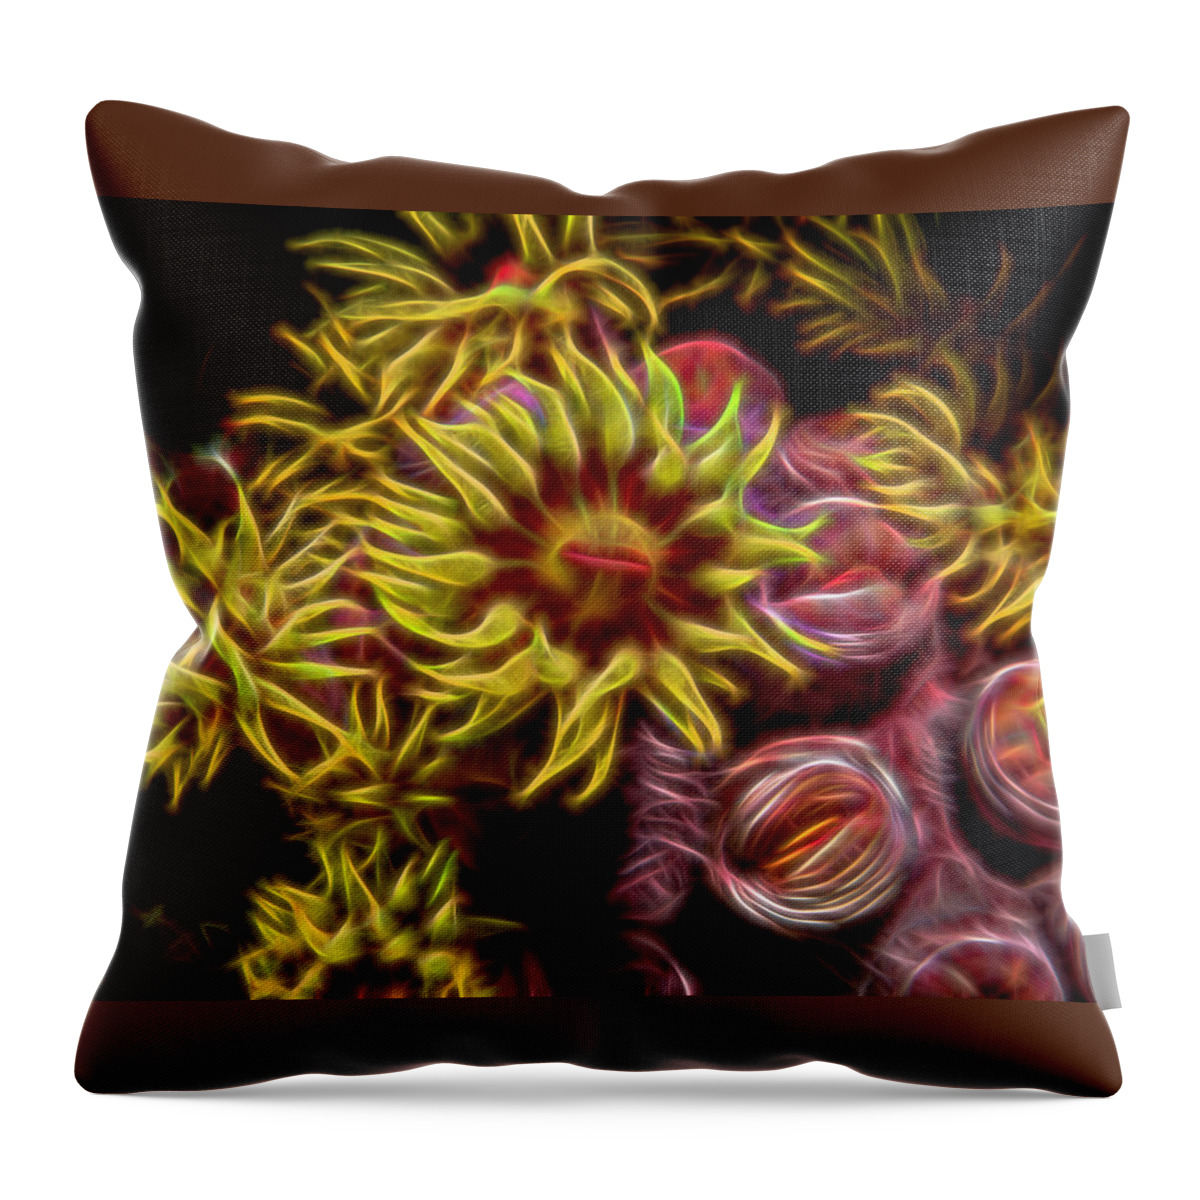 Coral Throw Pillow featuring the digital art Cup Corals Fractalized by Gary Hughes